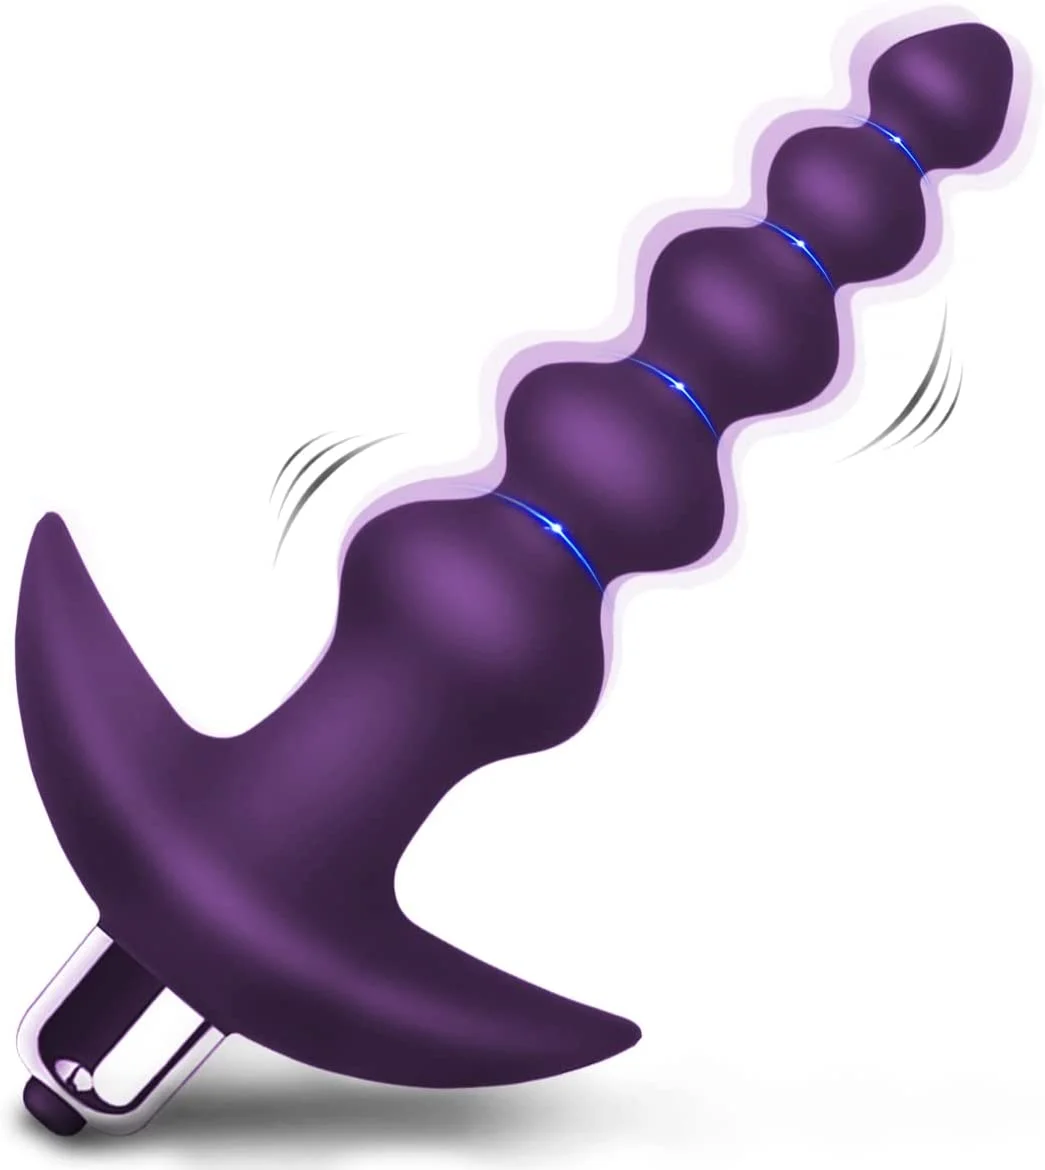 10-frequency vibration massager unisex anal plug adult sex toys